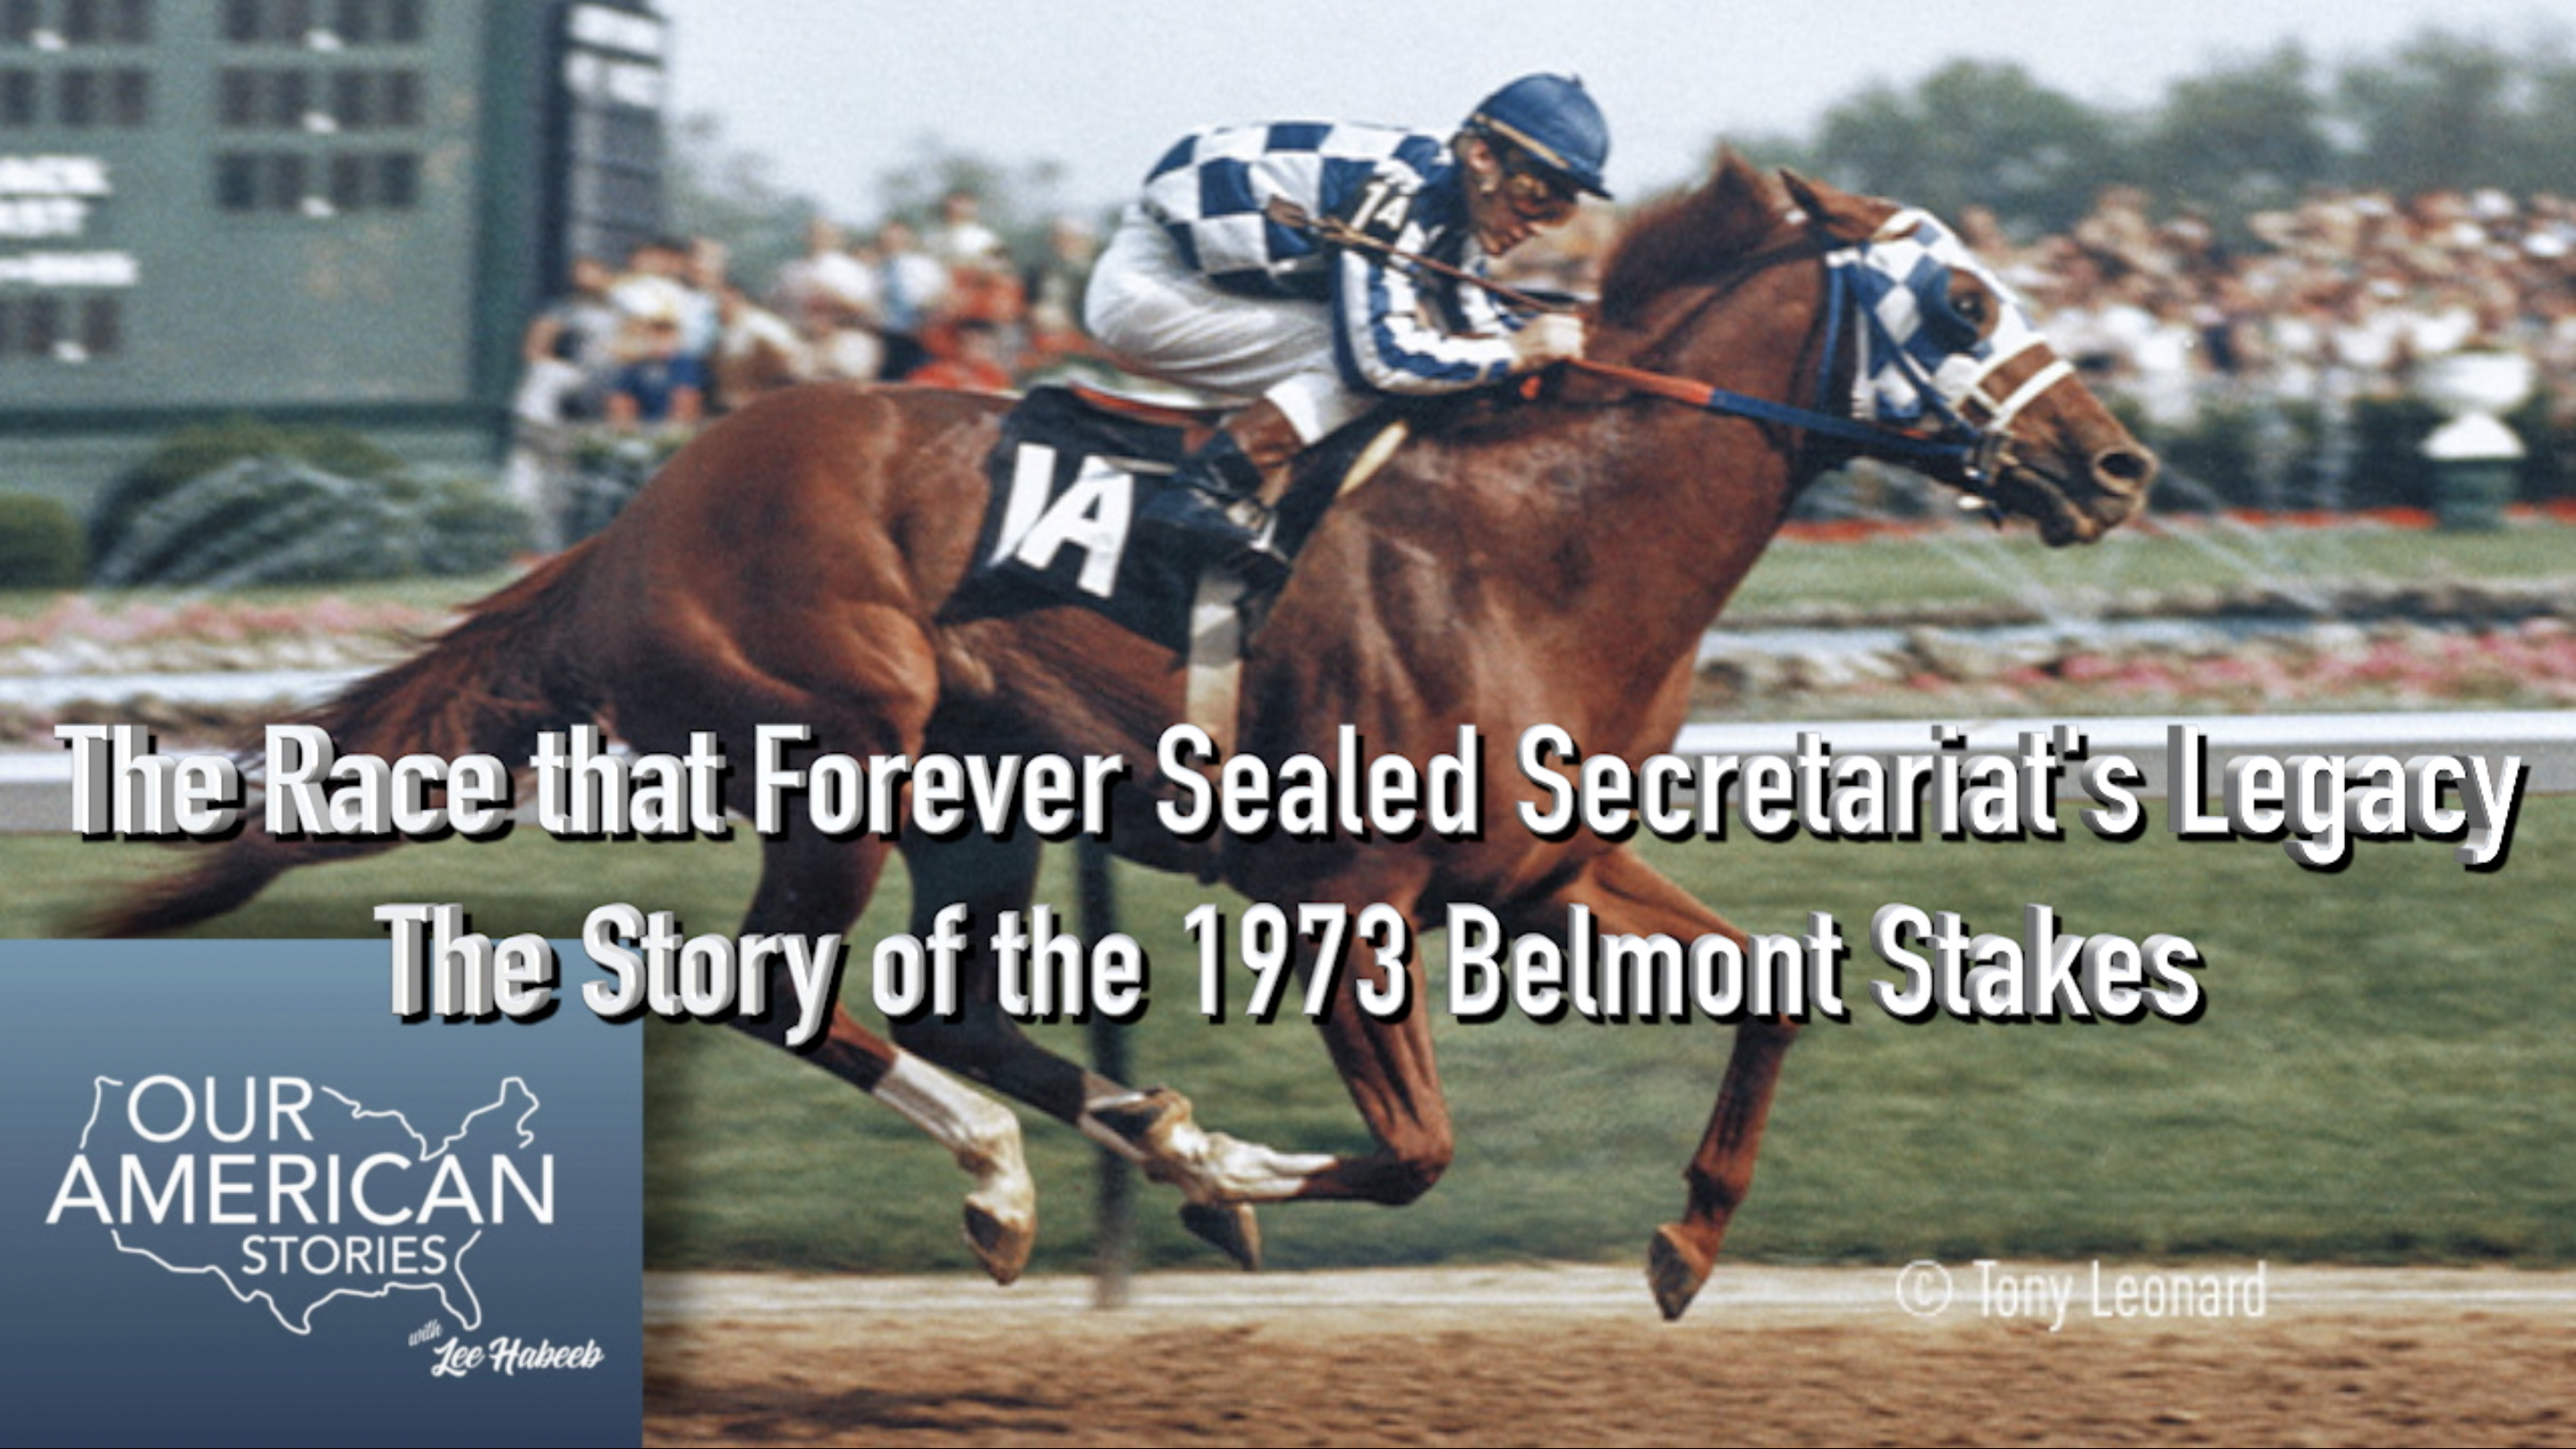 The Race that Forever Sealed Secretariat's Legacy: The Story of the 1973 Belmont Stakes (This Day In History)